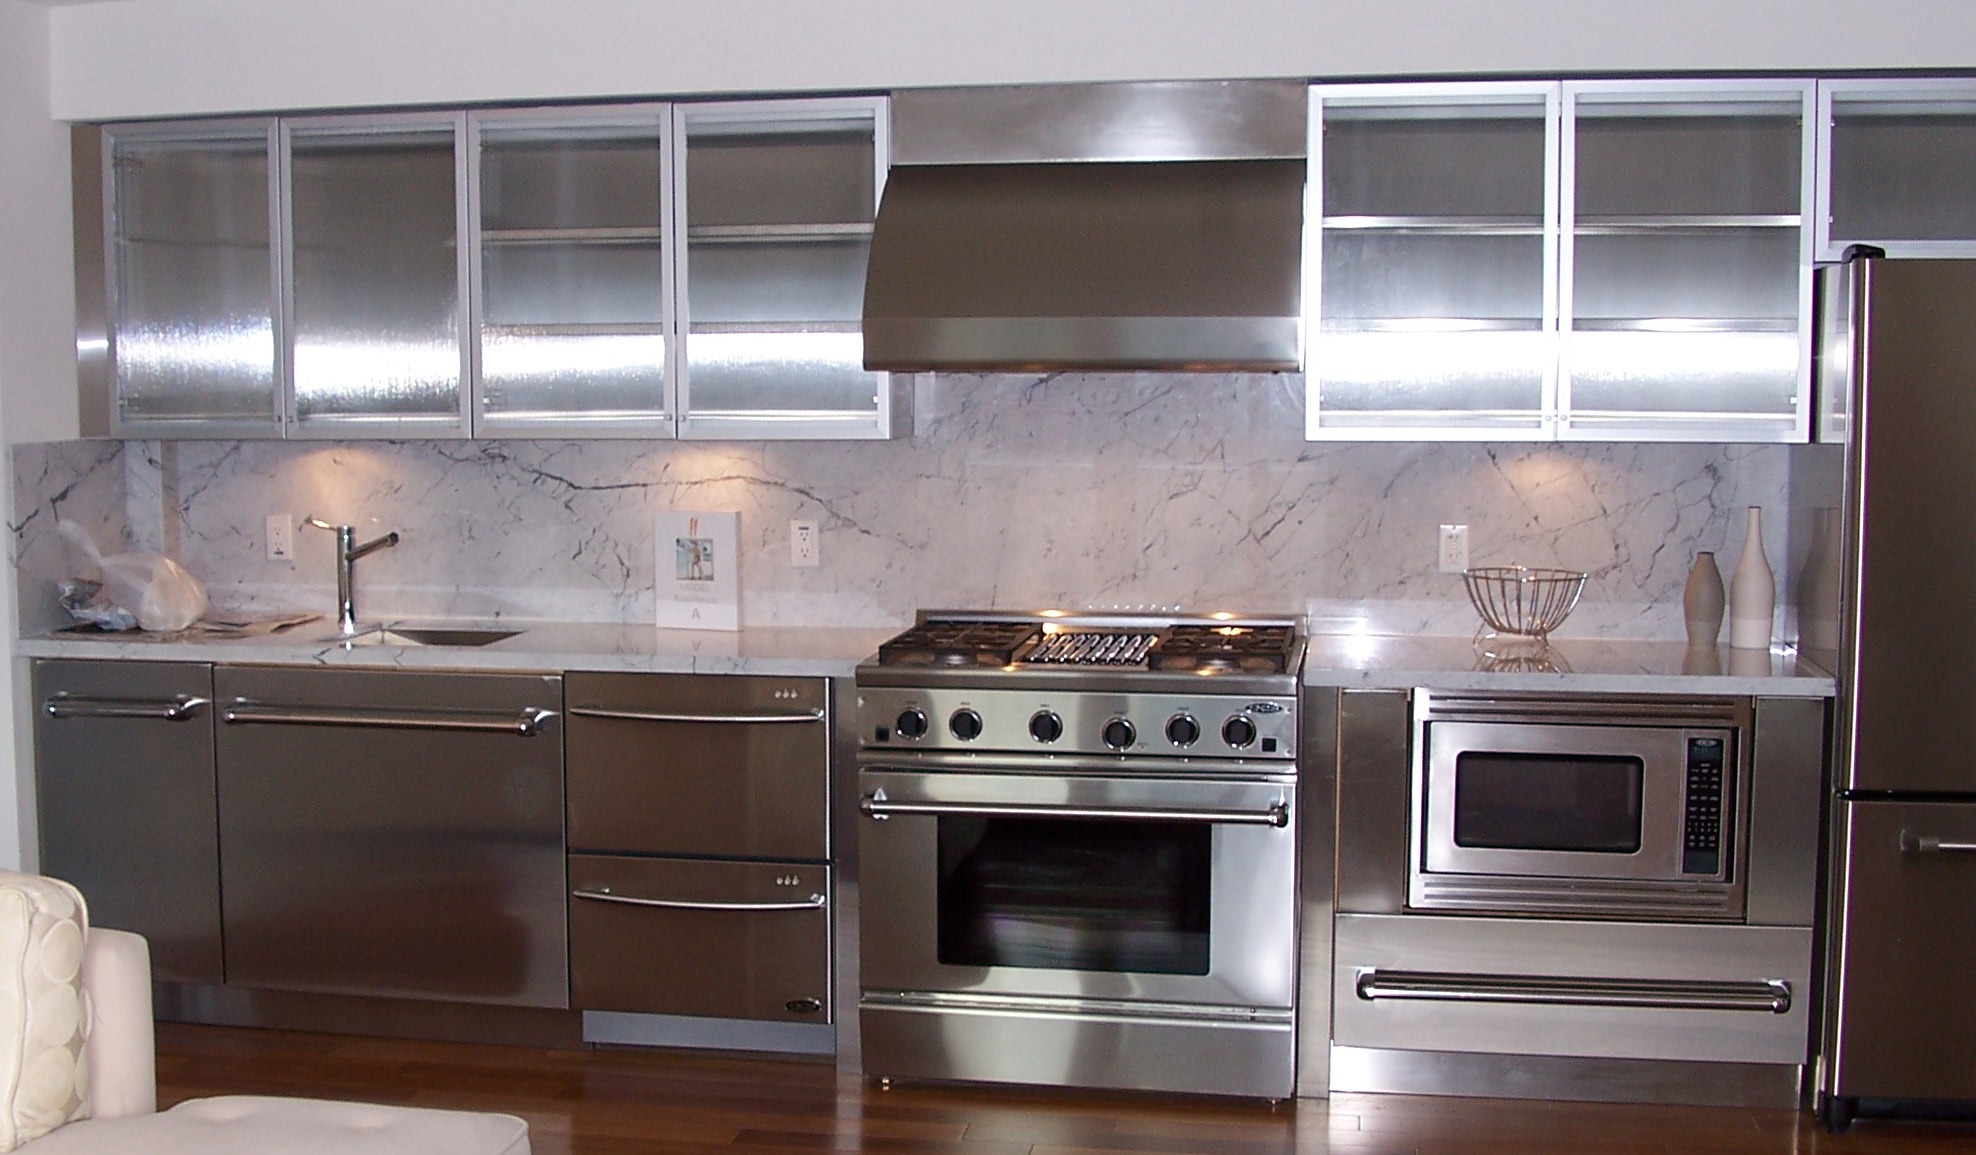 Minimalist Stainless Steel Kitchen Cabinets for Simple Design